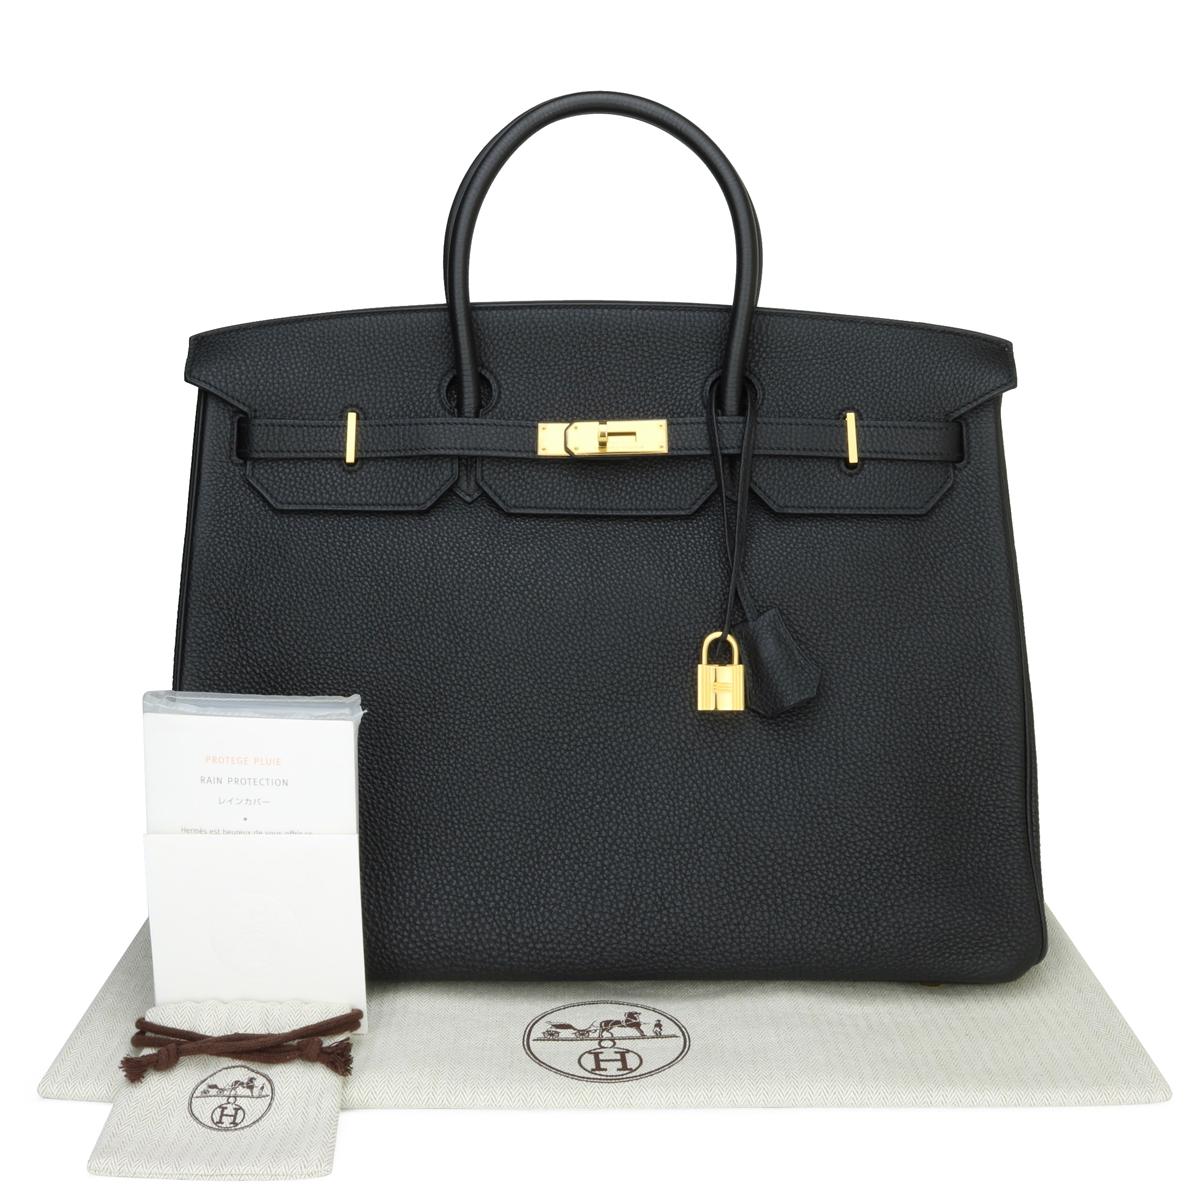 Hermès Birkin Bag 40cm Black Togo Leather with Gold Hardware Stamp N_Year 2010.

This bag is still in very good condition. The leather still smells fresh, along with it still holding to its original shape. The hardware is still very shiny.

The most